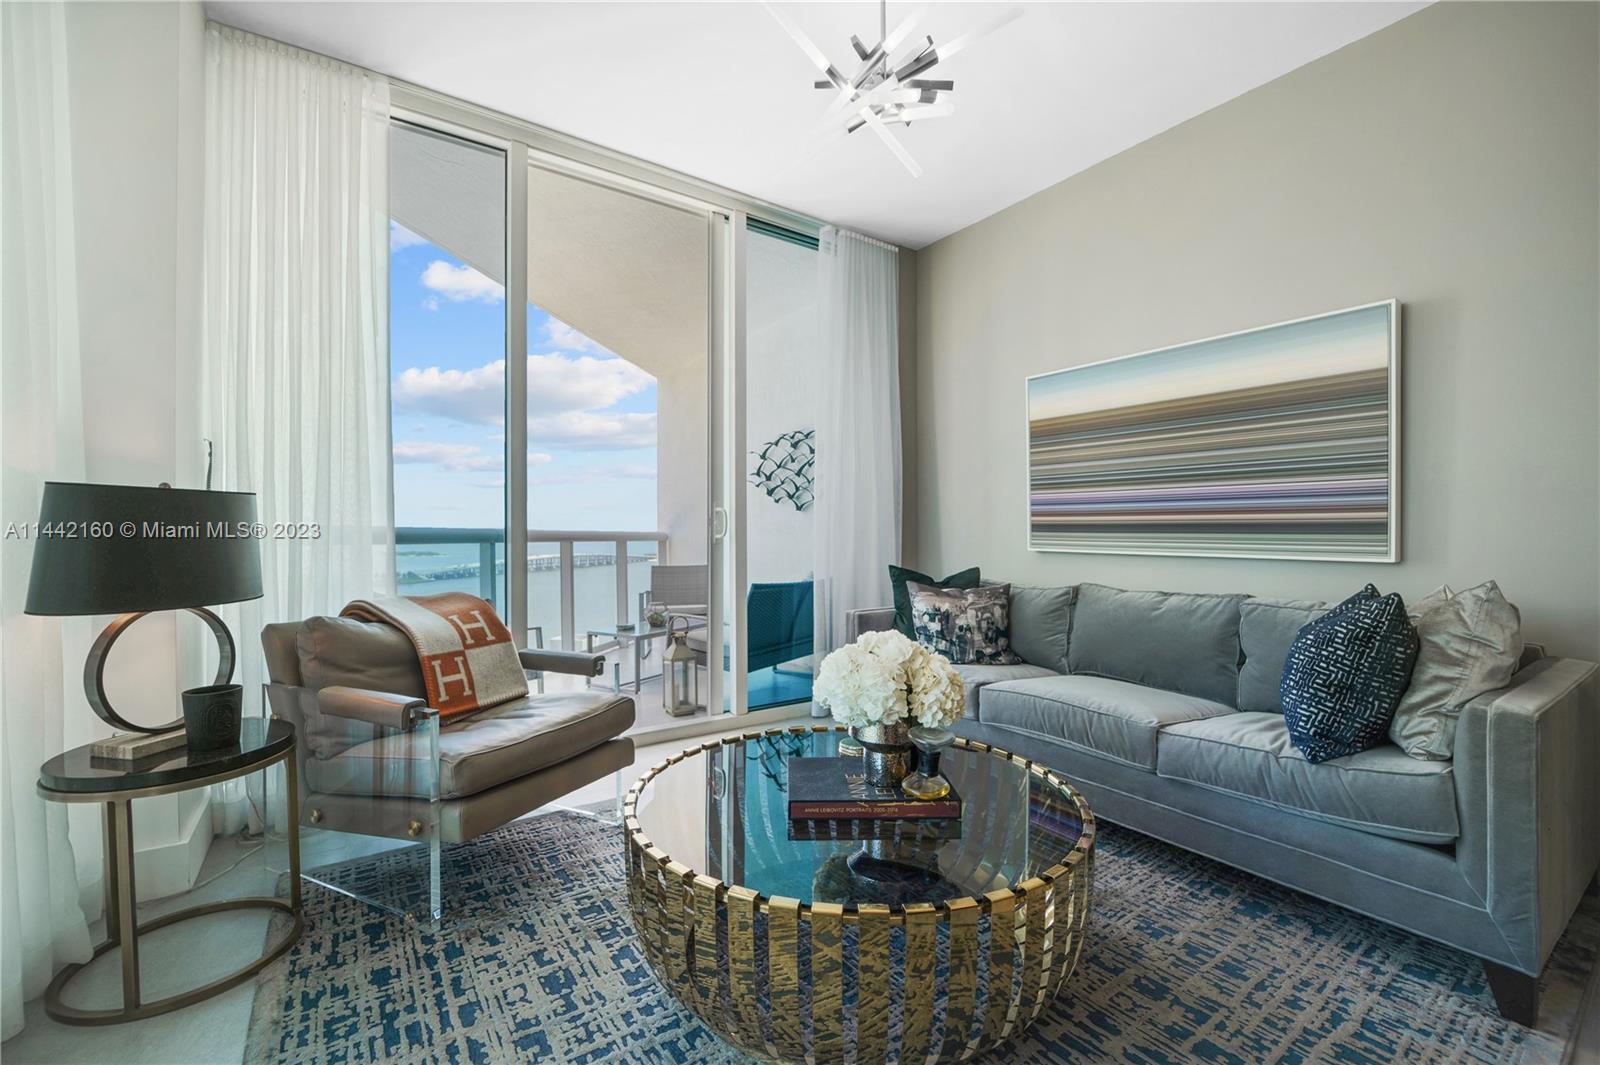 Sophisticated Unit in Edgewater East with amazing water views. Wake up to Biscayne Bay views from ev